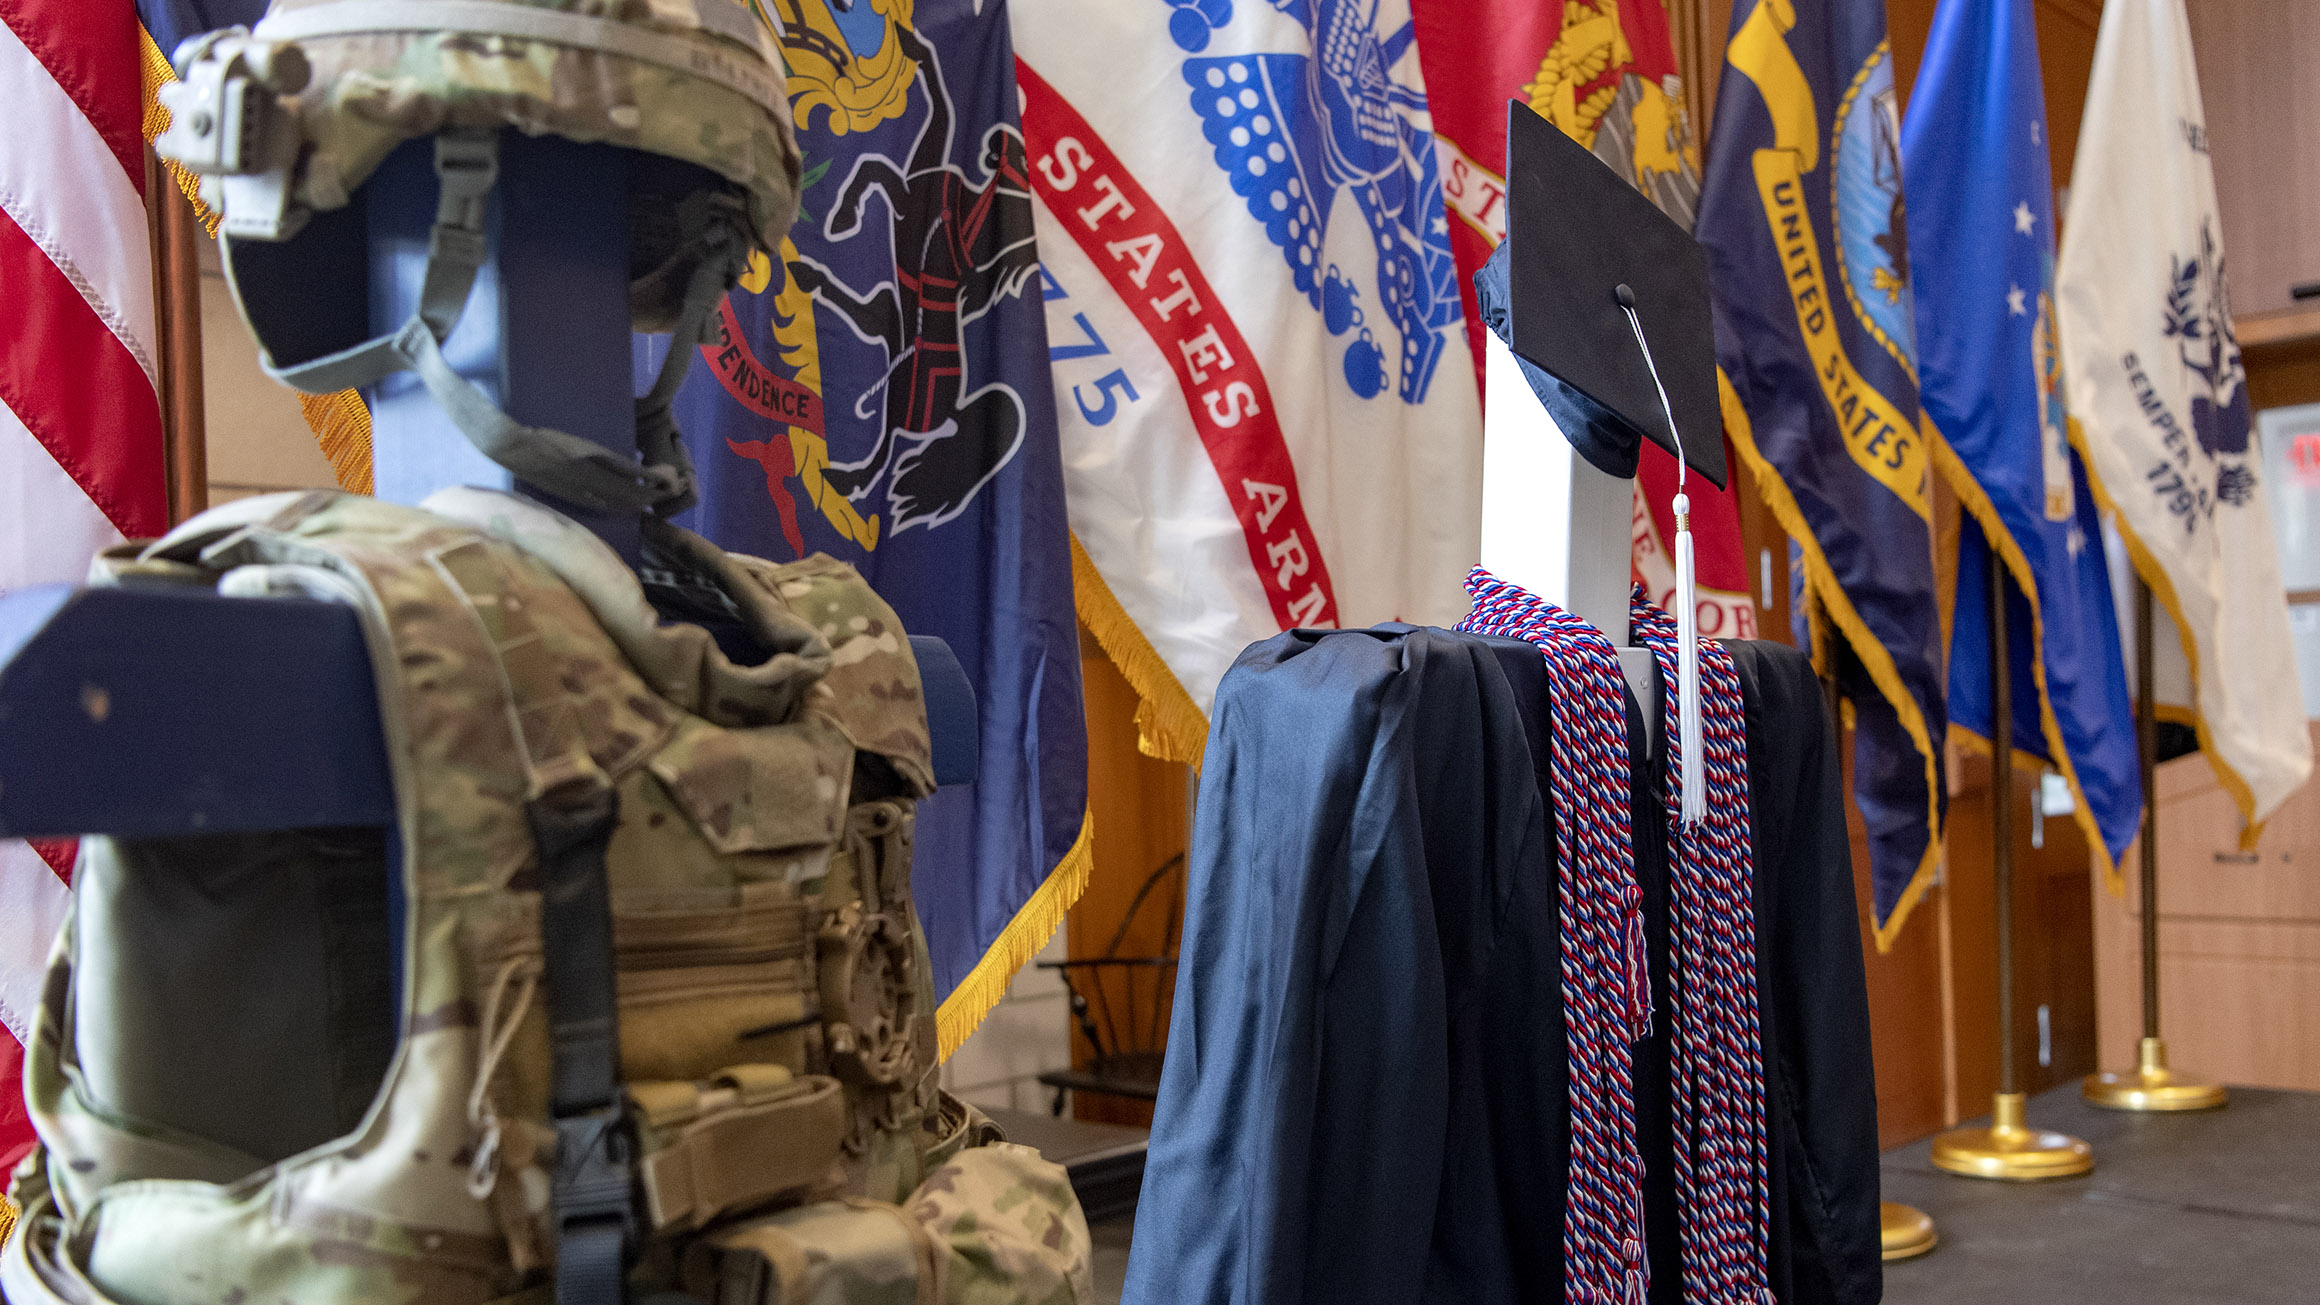 A graduation gown with military honor cords is shown next to military gear